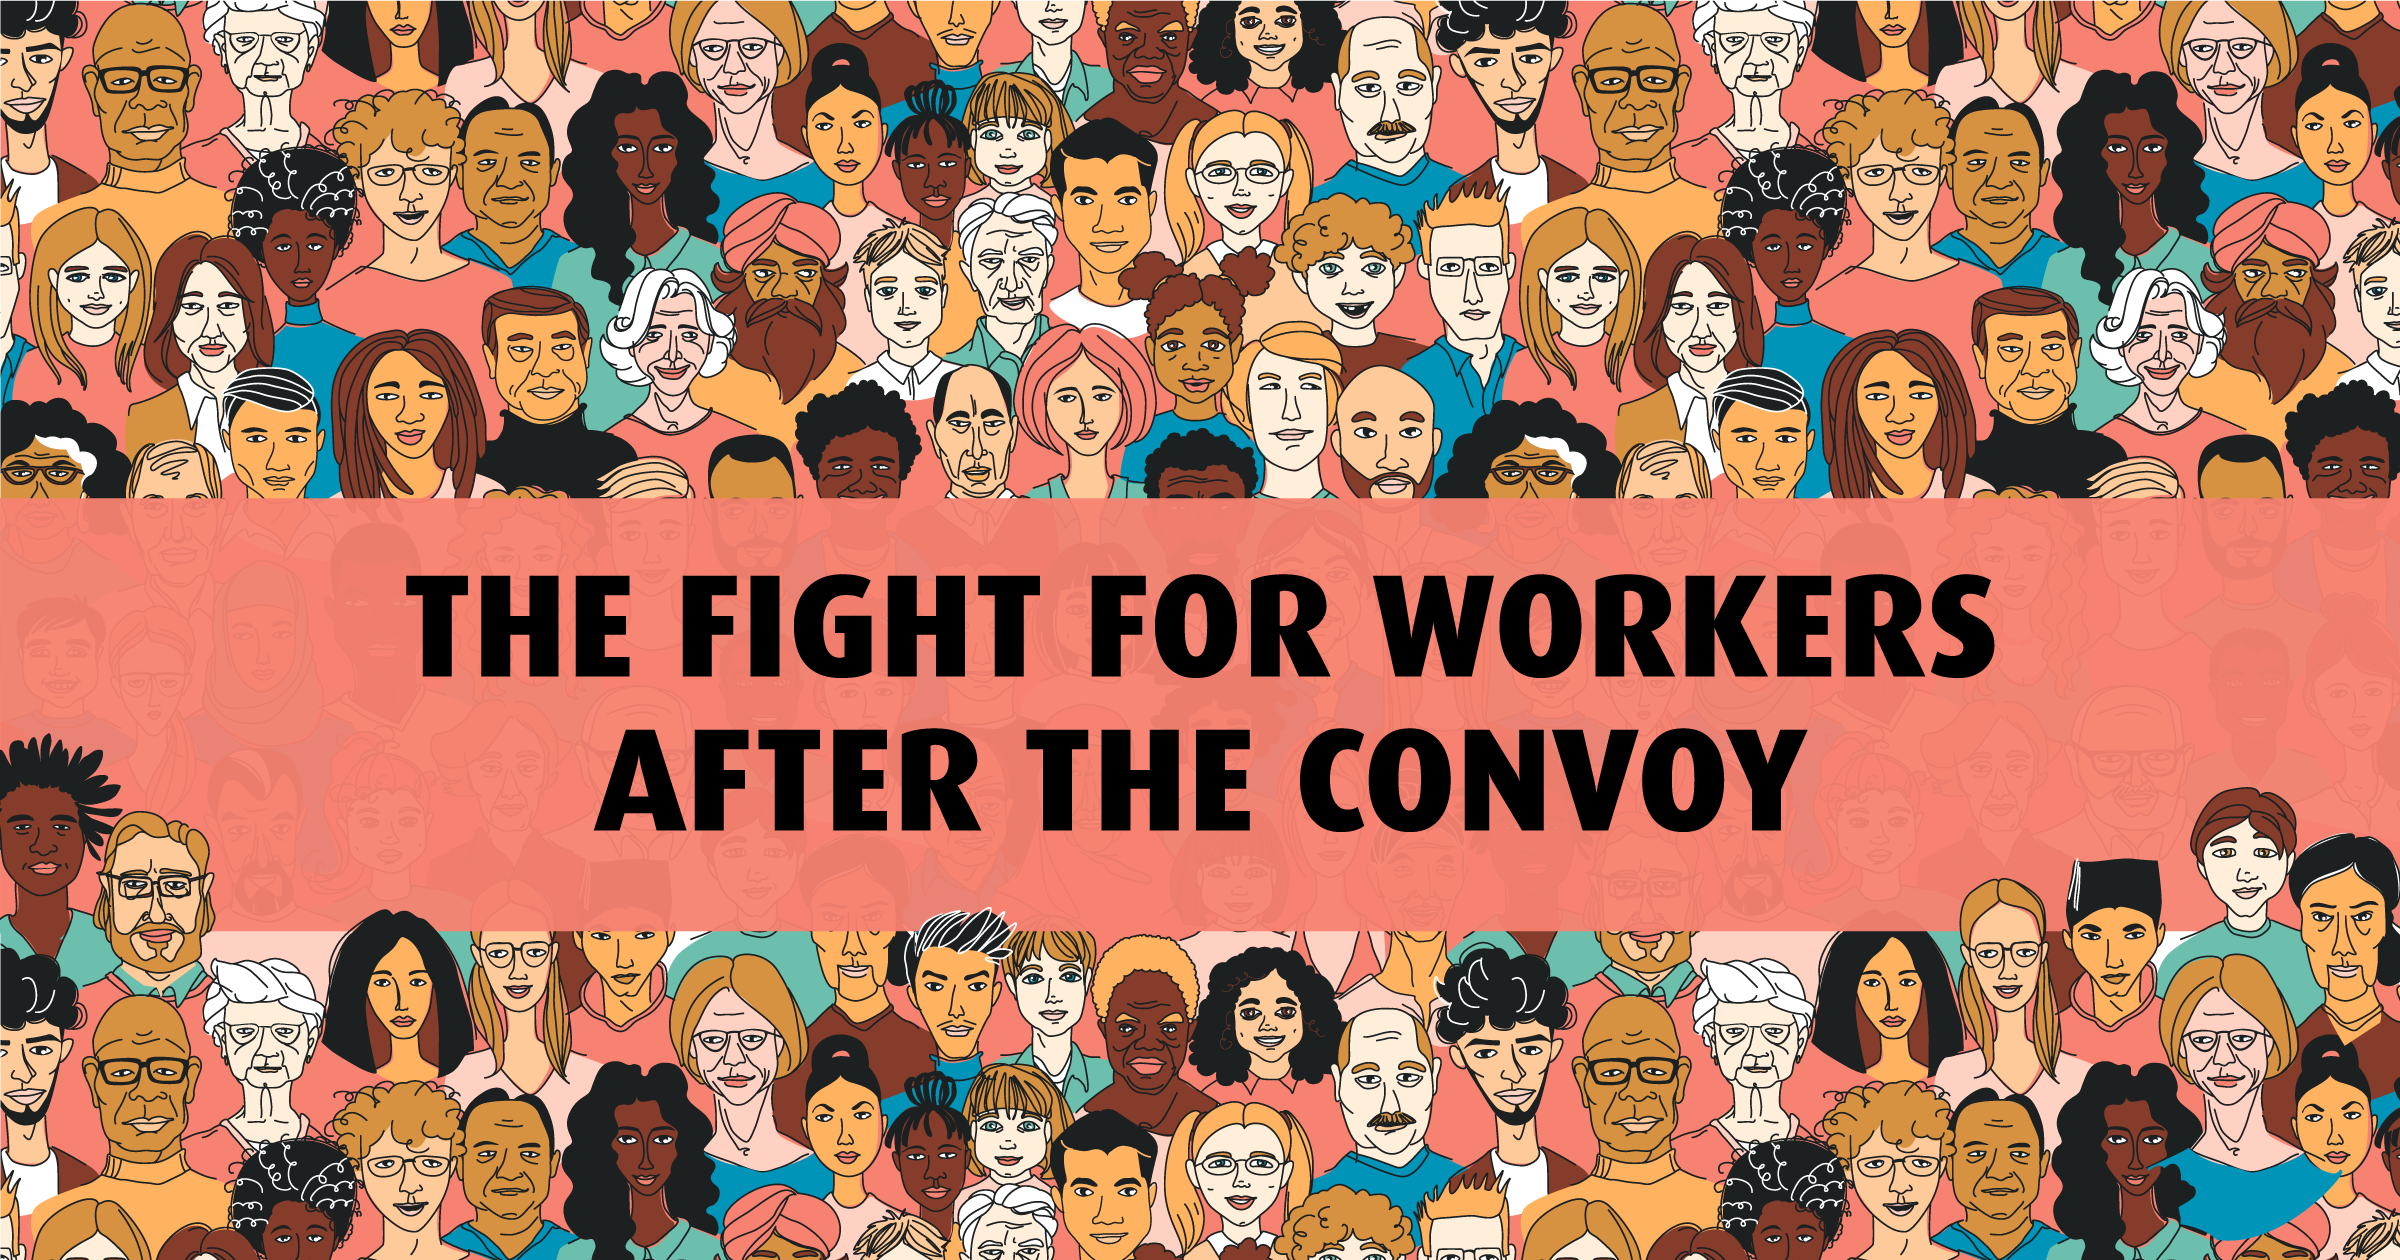 Web banner. Text: The fight for workers after the convoy. Image: illustration of a crowd of people.